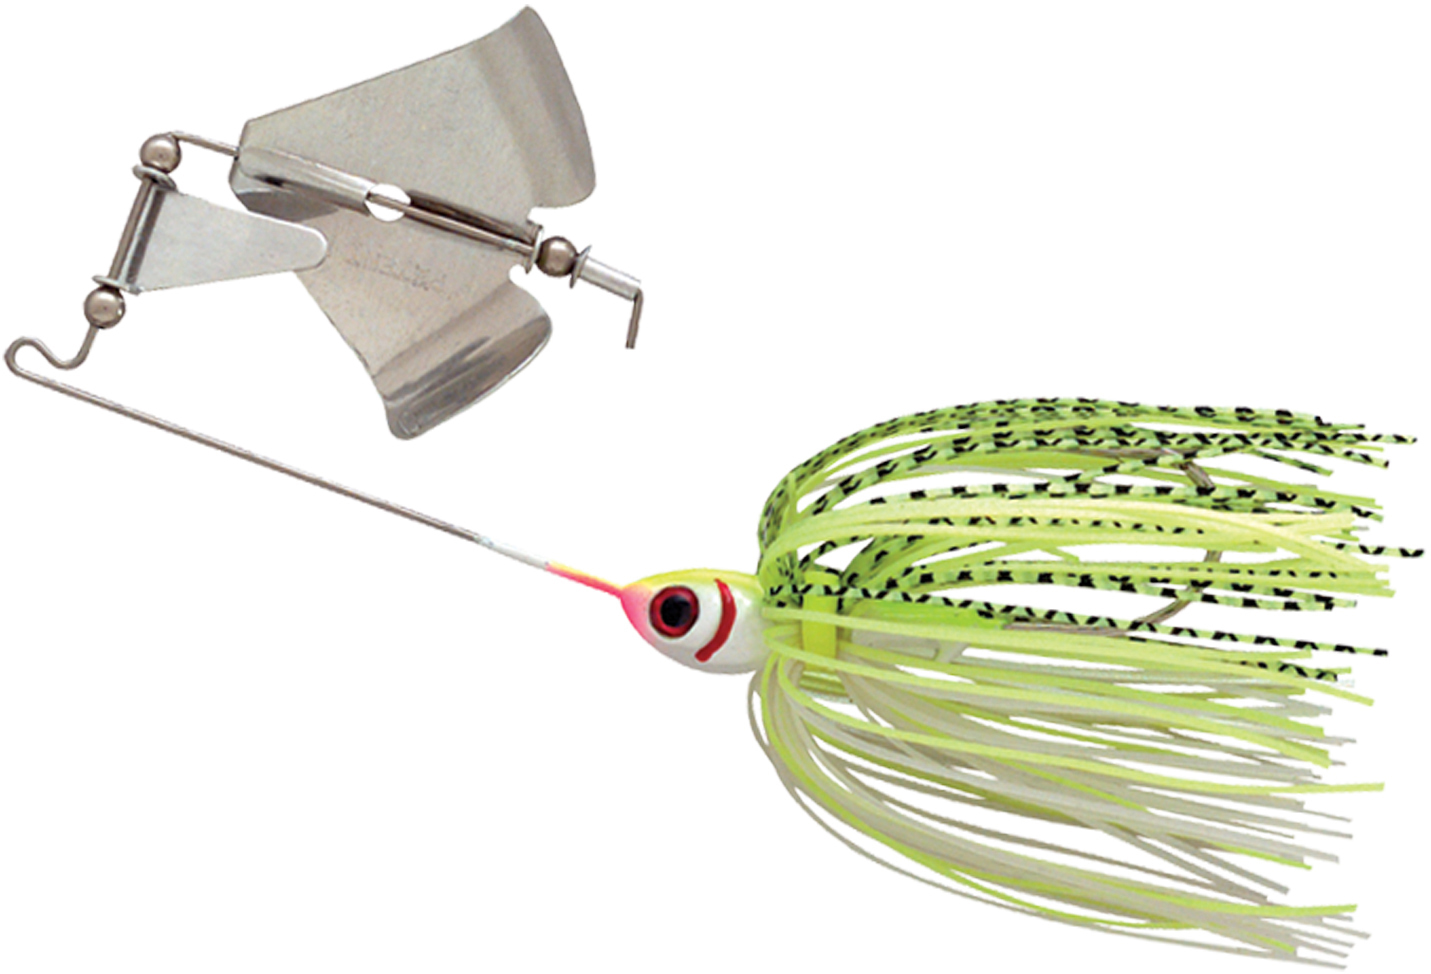 Booyah BYB14606 Buzz Bait, 1/4 oz White/Chartreuse Shad